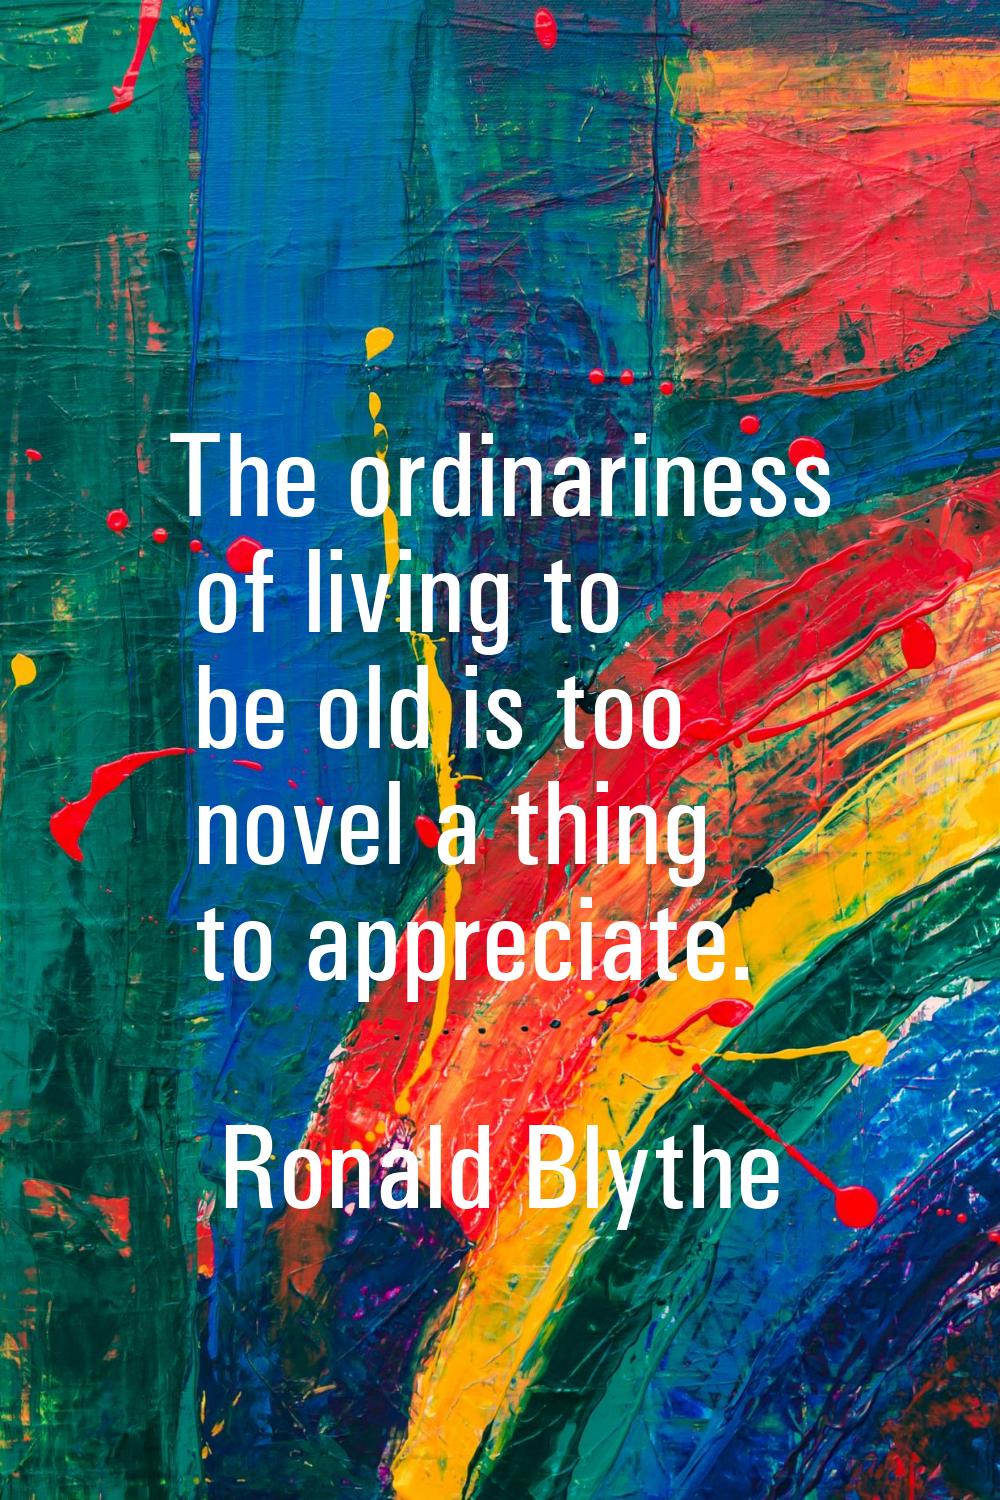 The ordinariness of living to be old is too novel a thing to appreciate.